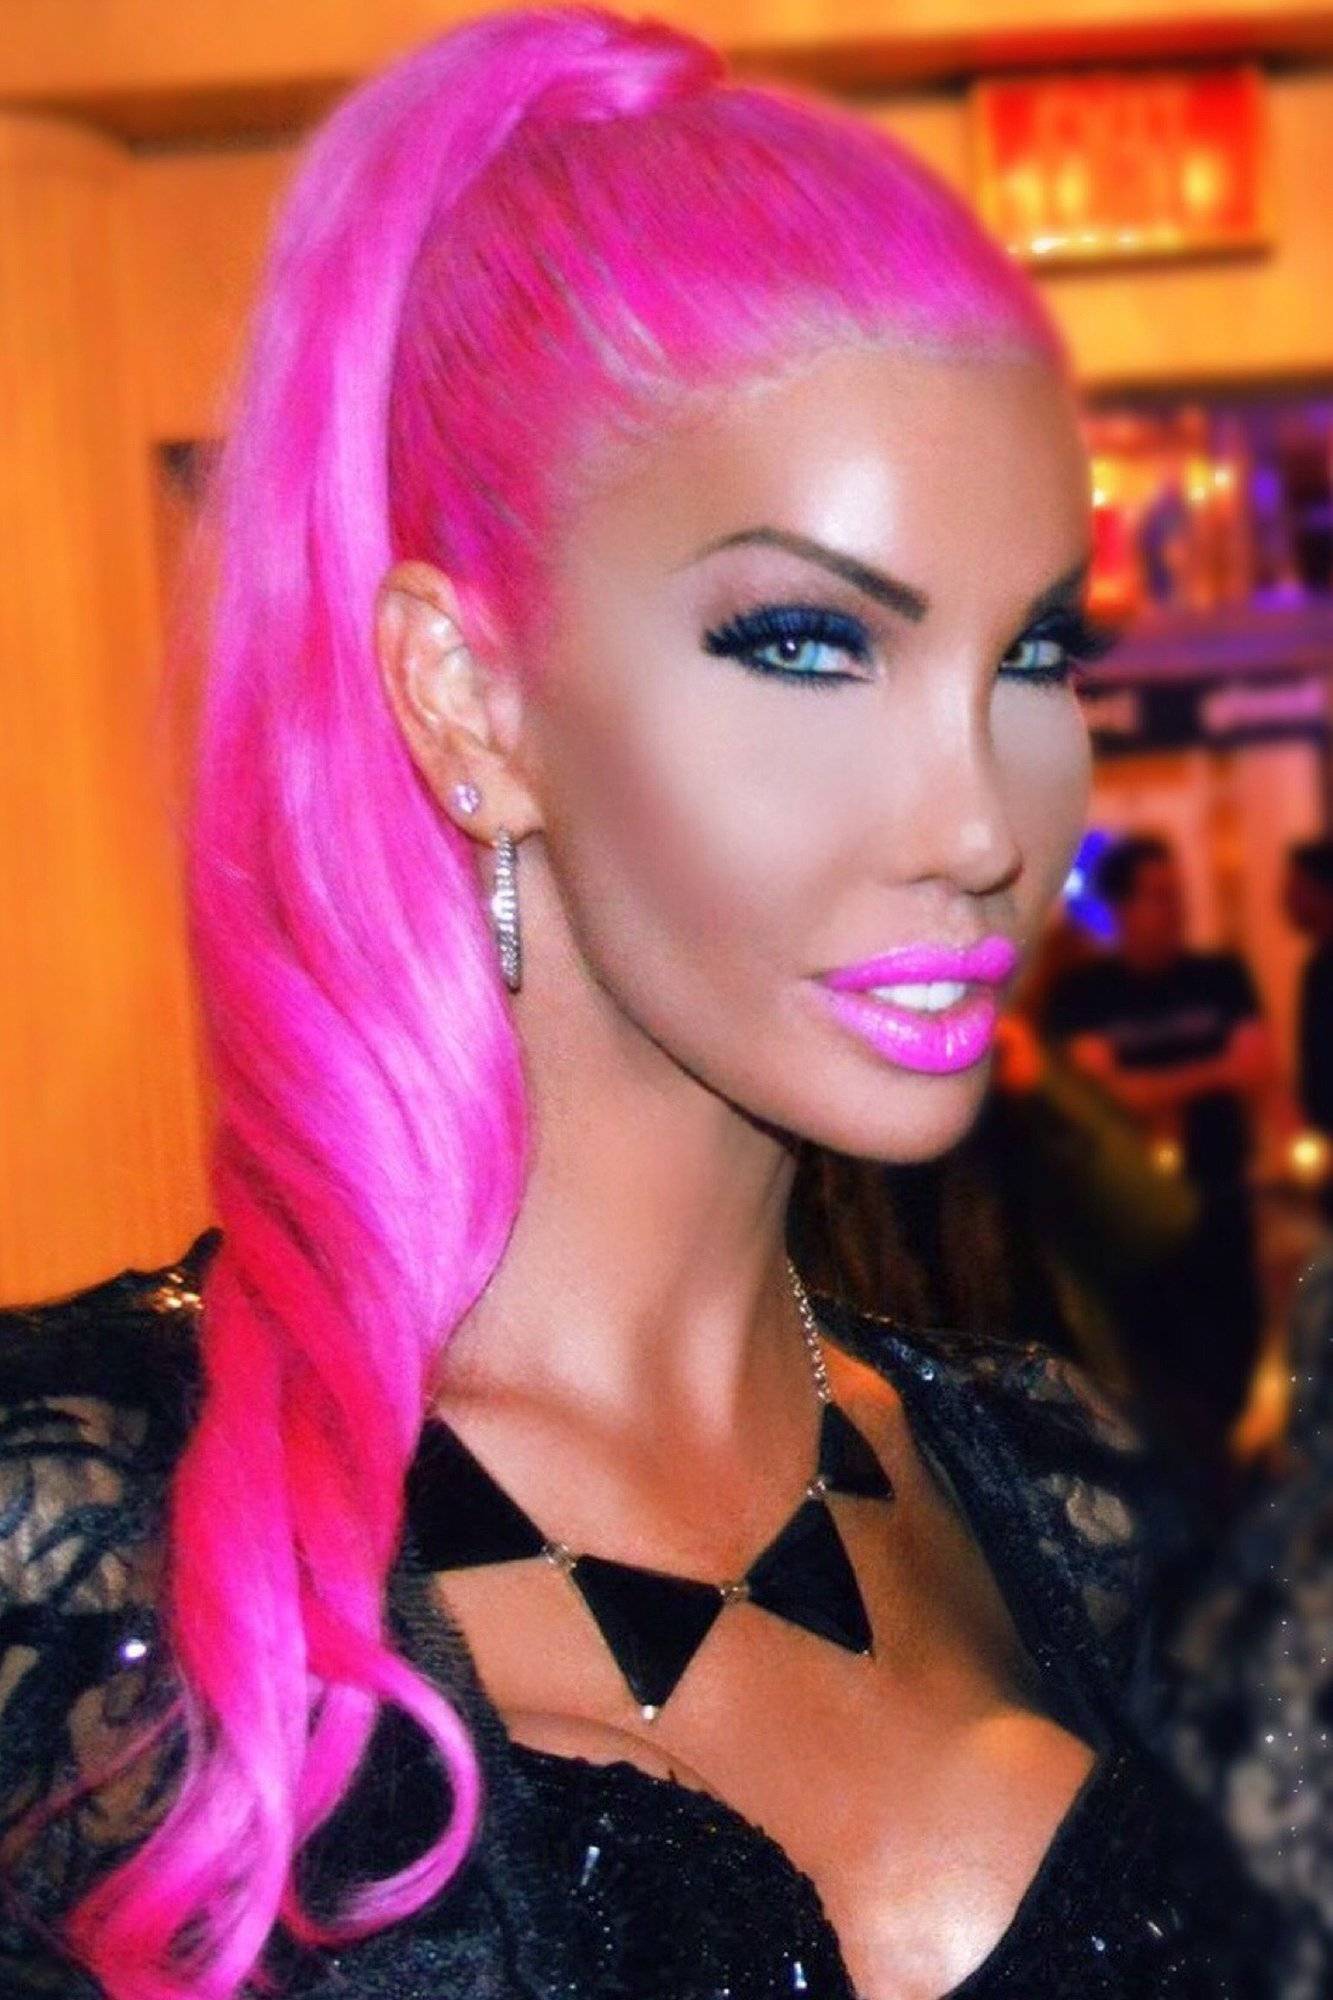 Shemale with 100 plastic surgeries